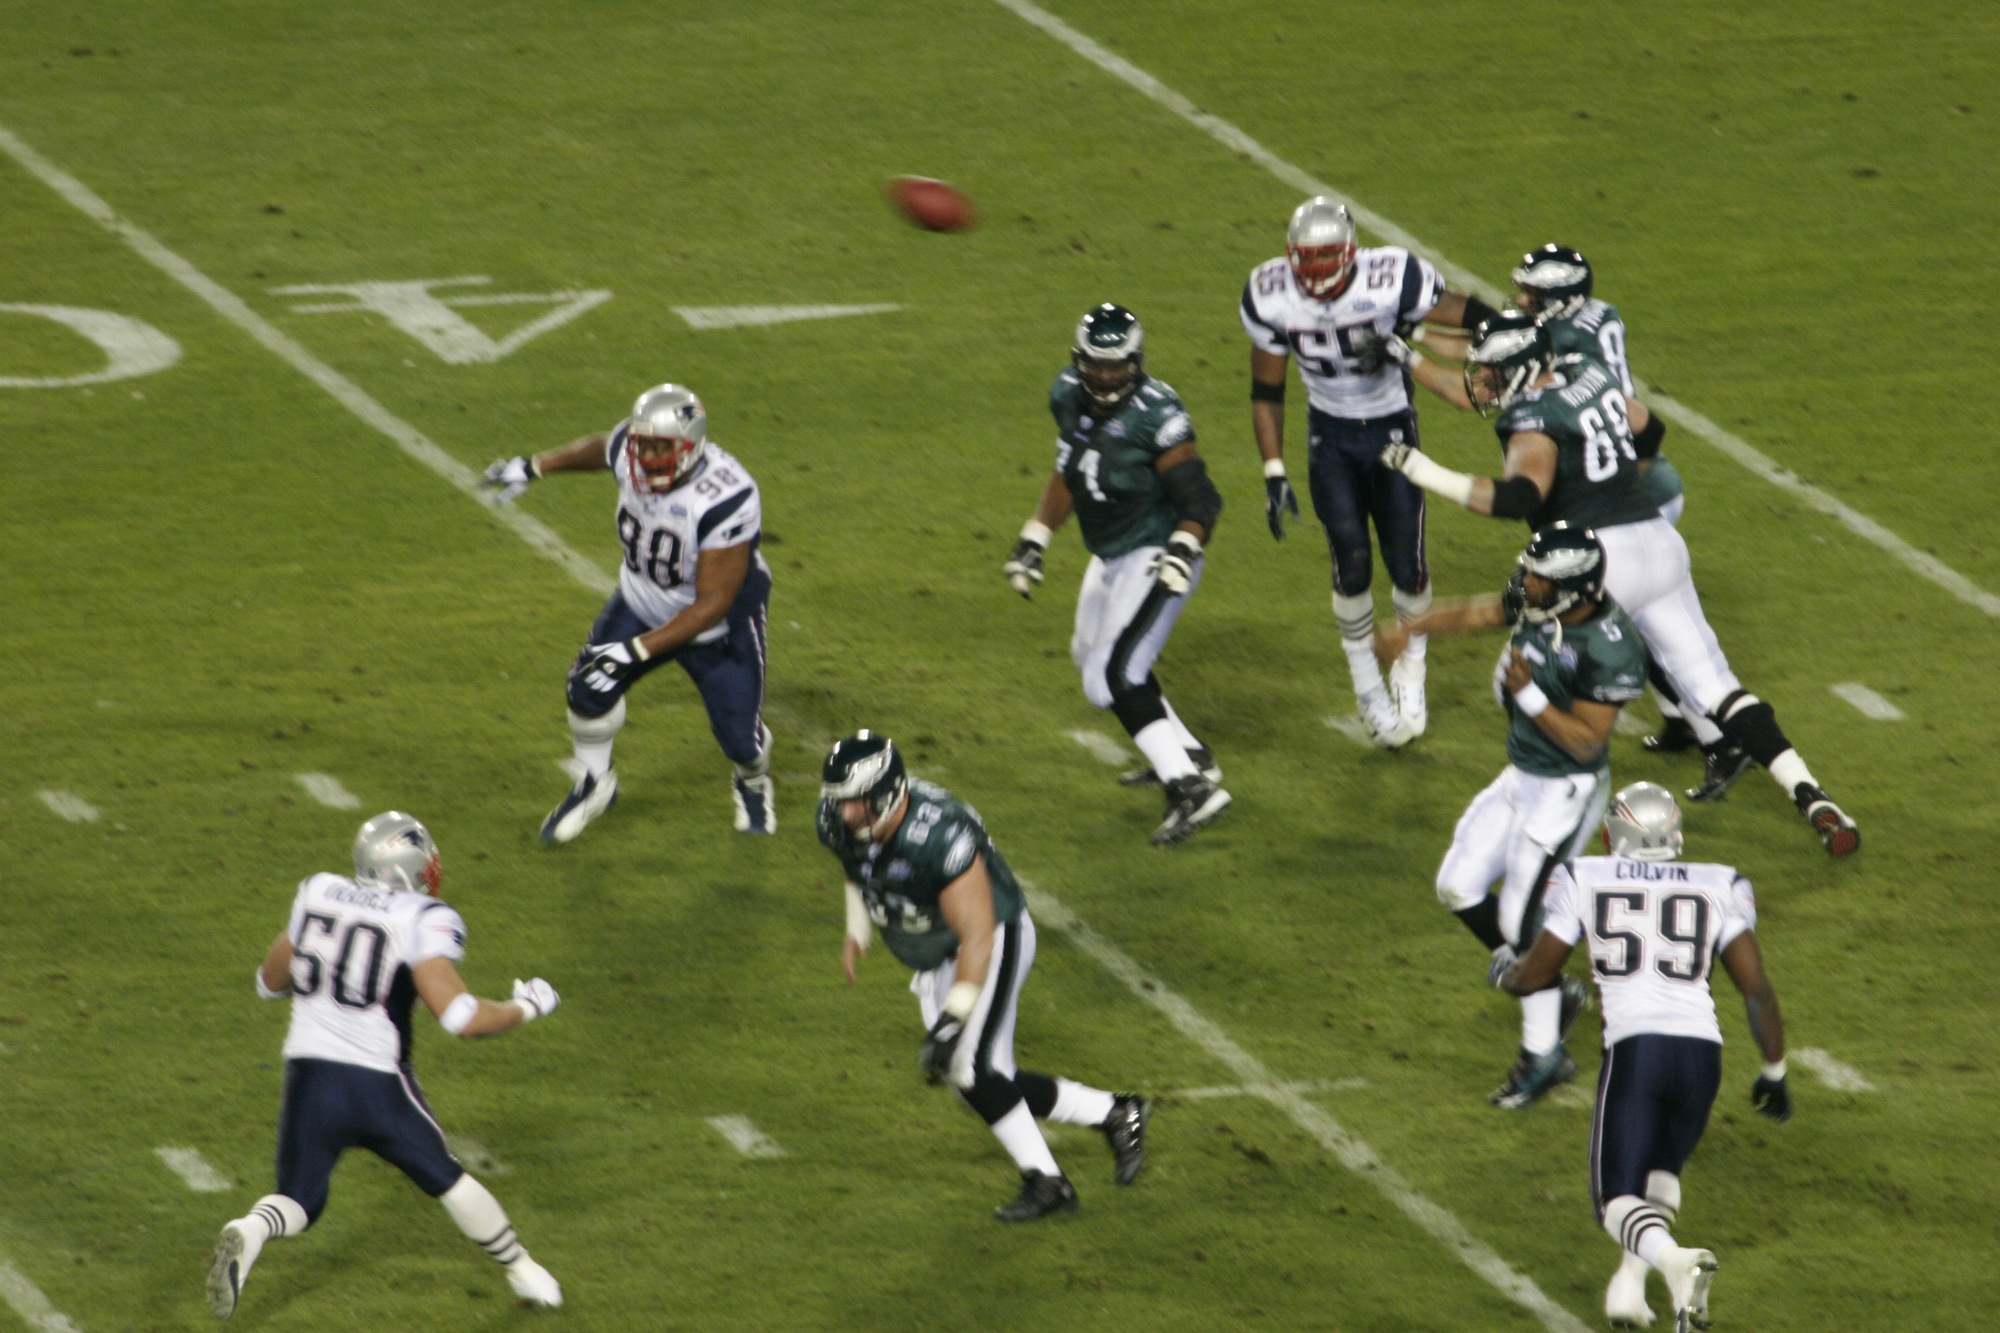 Ways to Watch Super Bowl 2021 Online and While Overseas